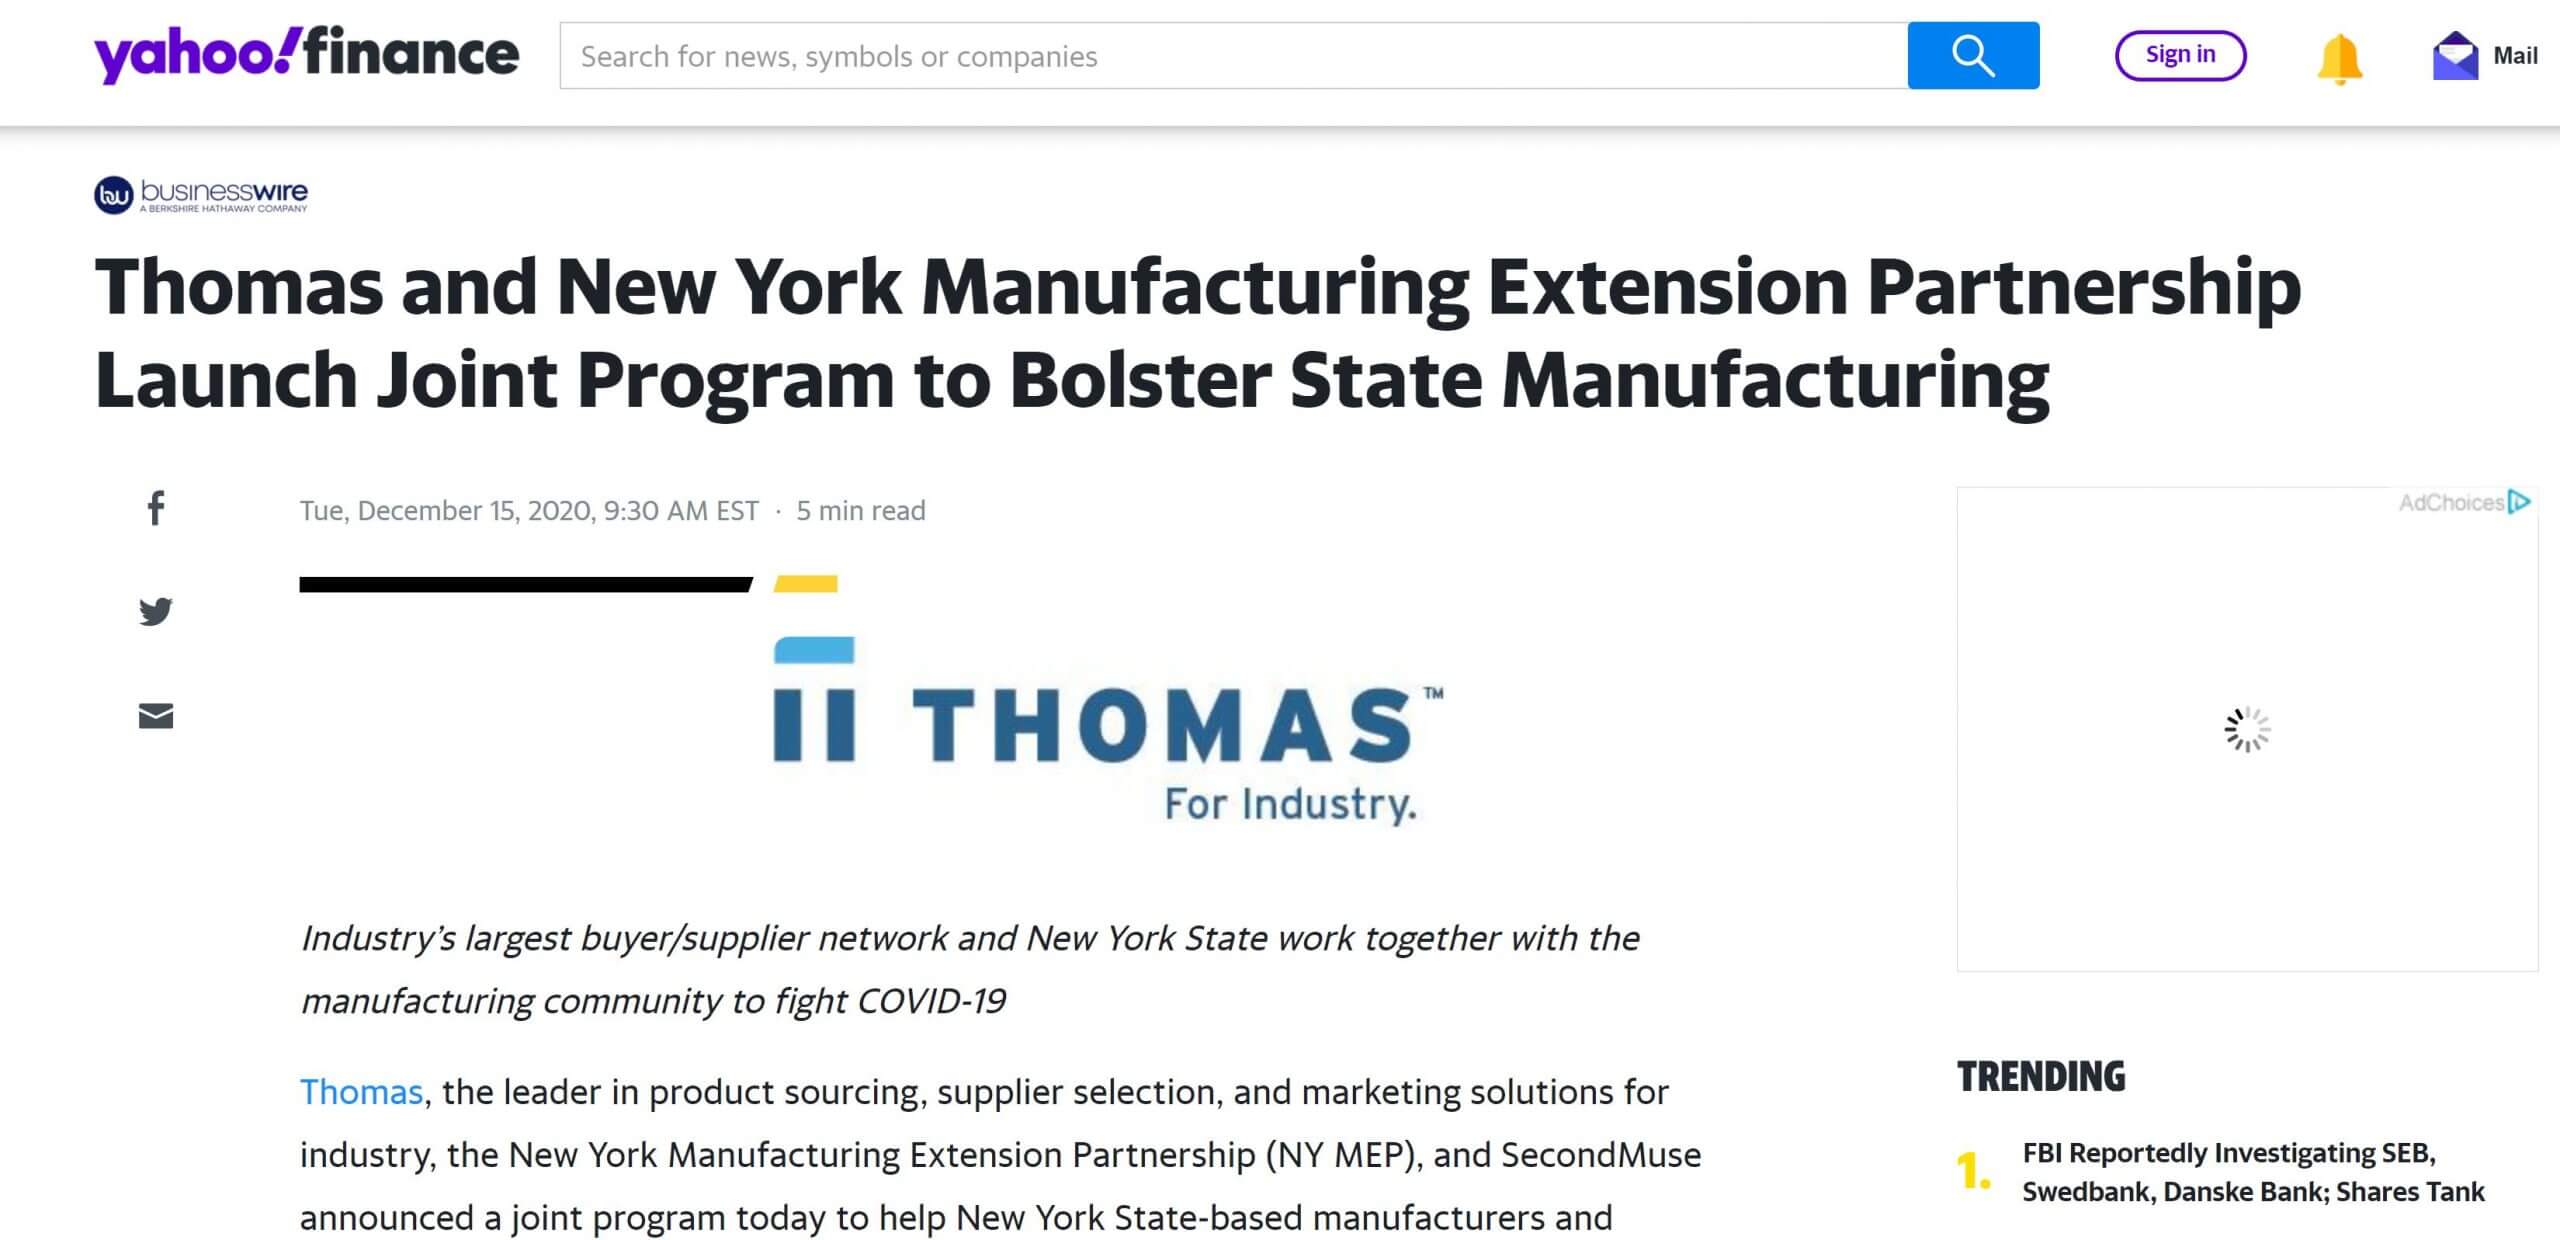 Thomas and New York Manufacturing Extension Partnership Launch Joint Program to Bolster State Manufacturing